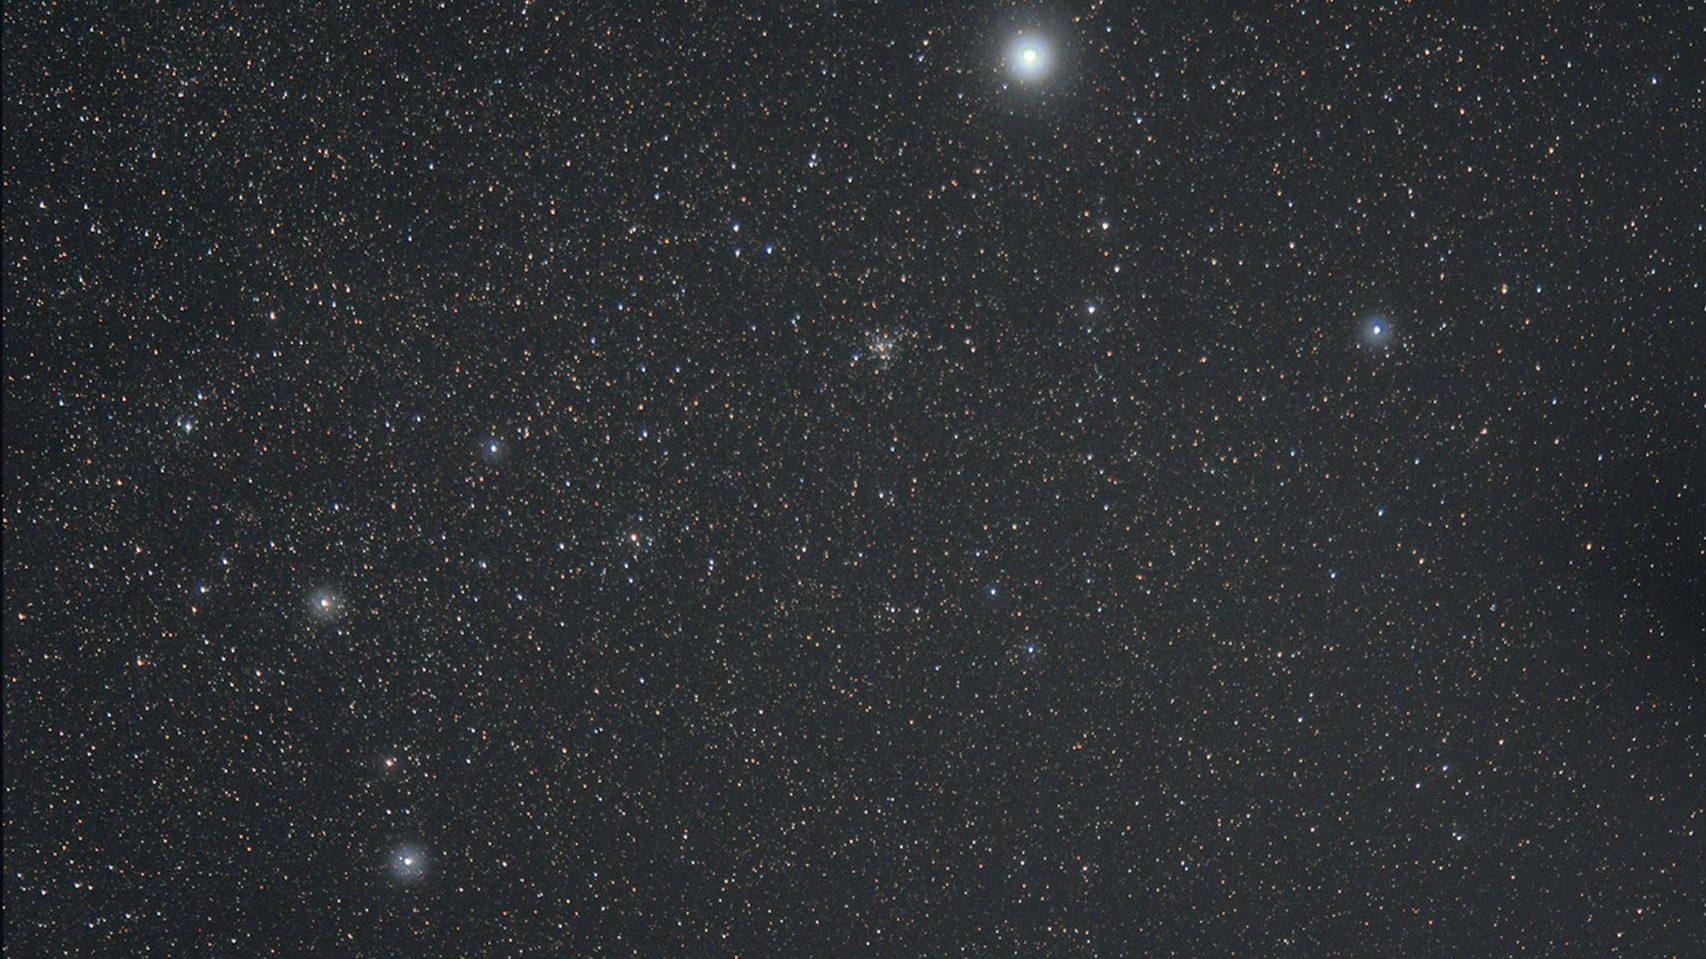 The constellation of Canis Major contains open clusters from different catalogues, all visible with binoculars. Rolf Löhr/CCD Guide